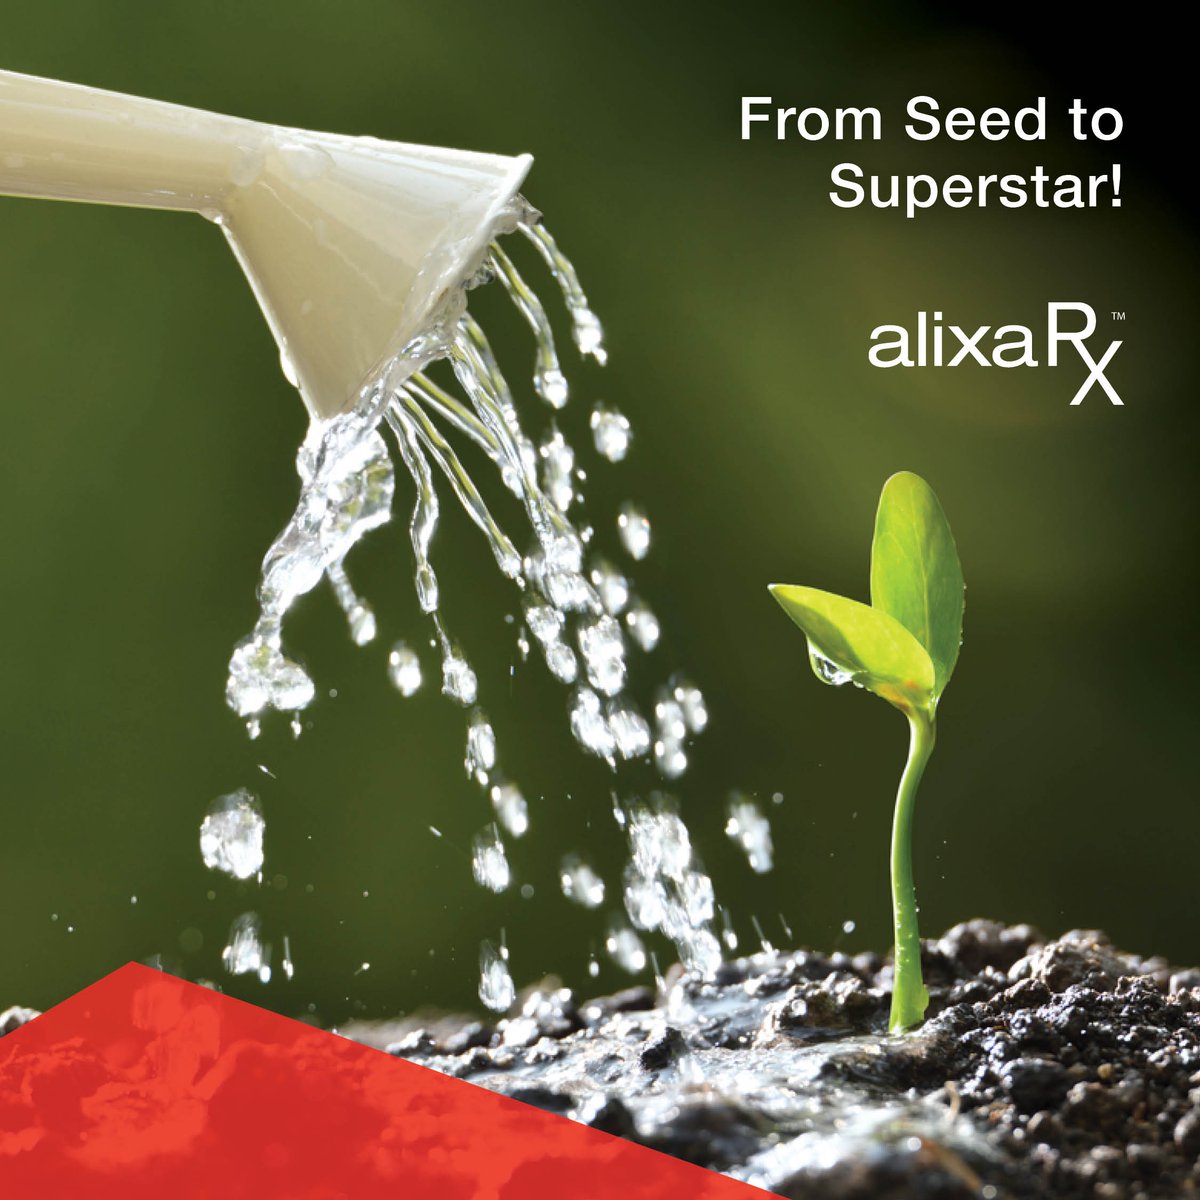 At AlixaRx, we believe in nurturing your career growth and development. We offer a range of generous benefits and competitive pay to support you in achieving your professional aspirations.

Apply today:
AlixaRx.com/careers/ 

#AlixaRx #PharmacyCareers